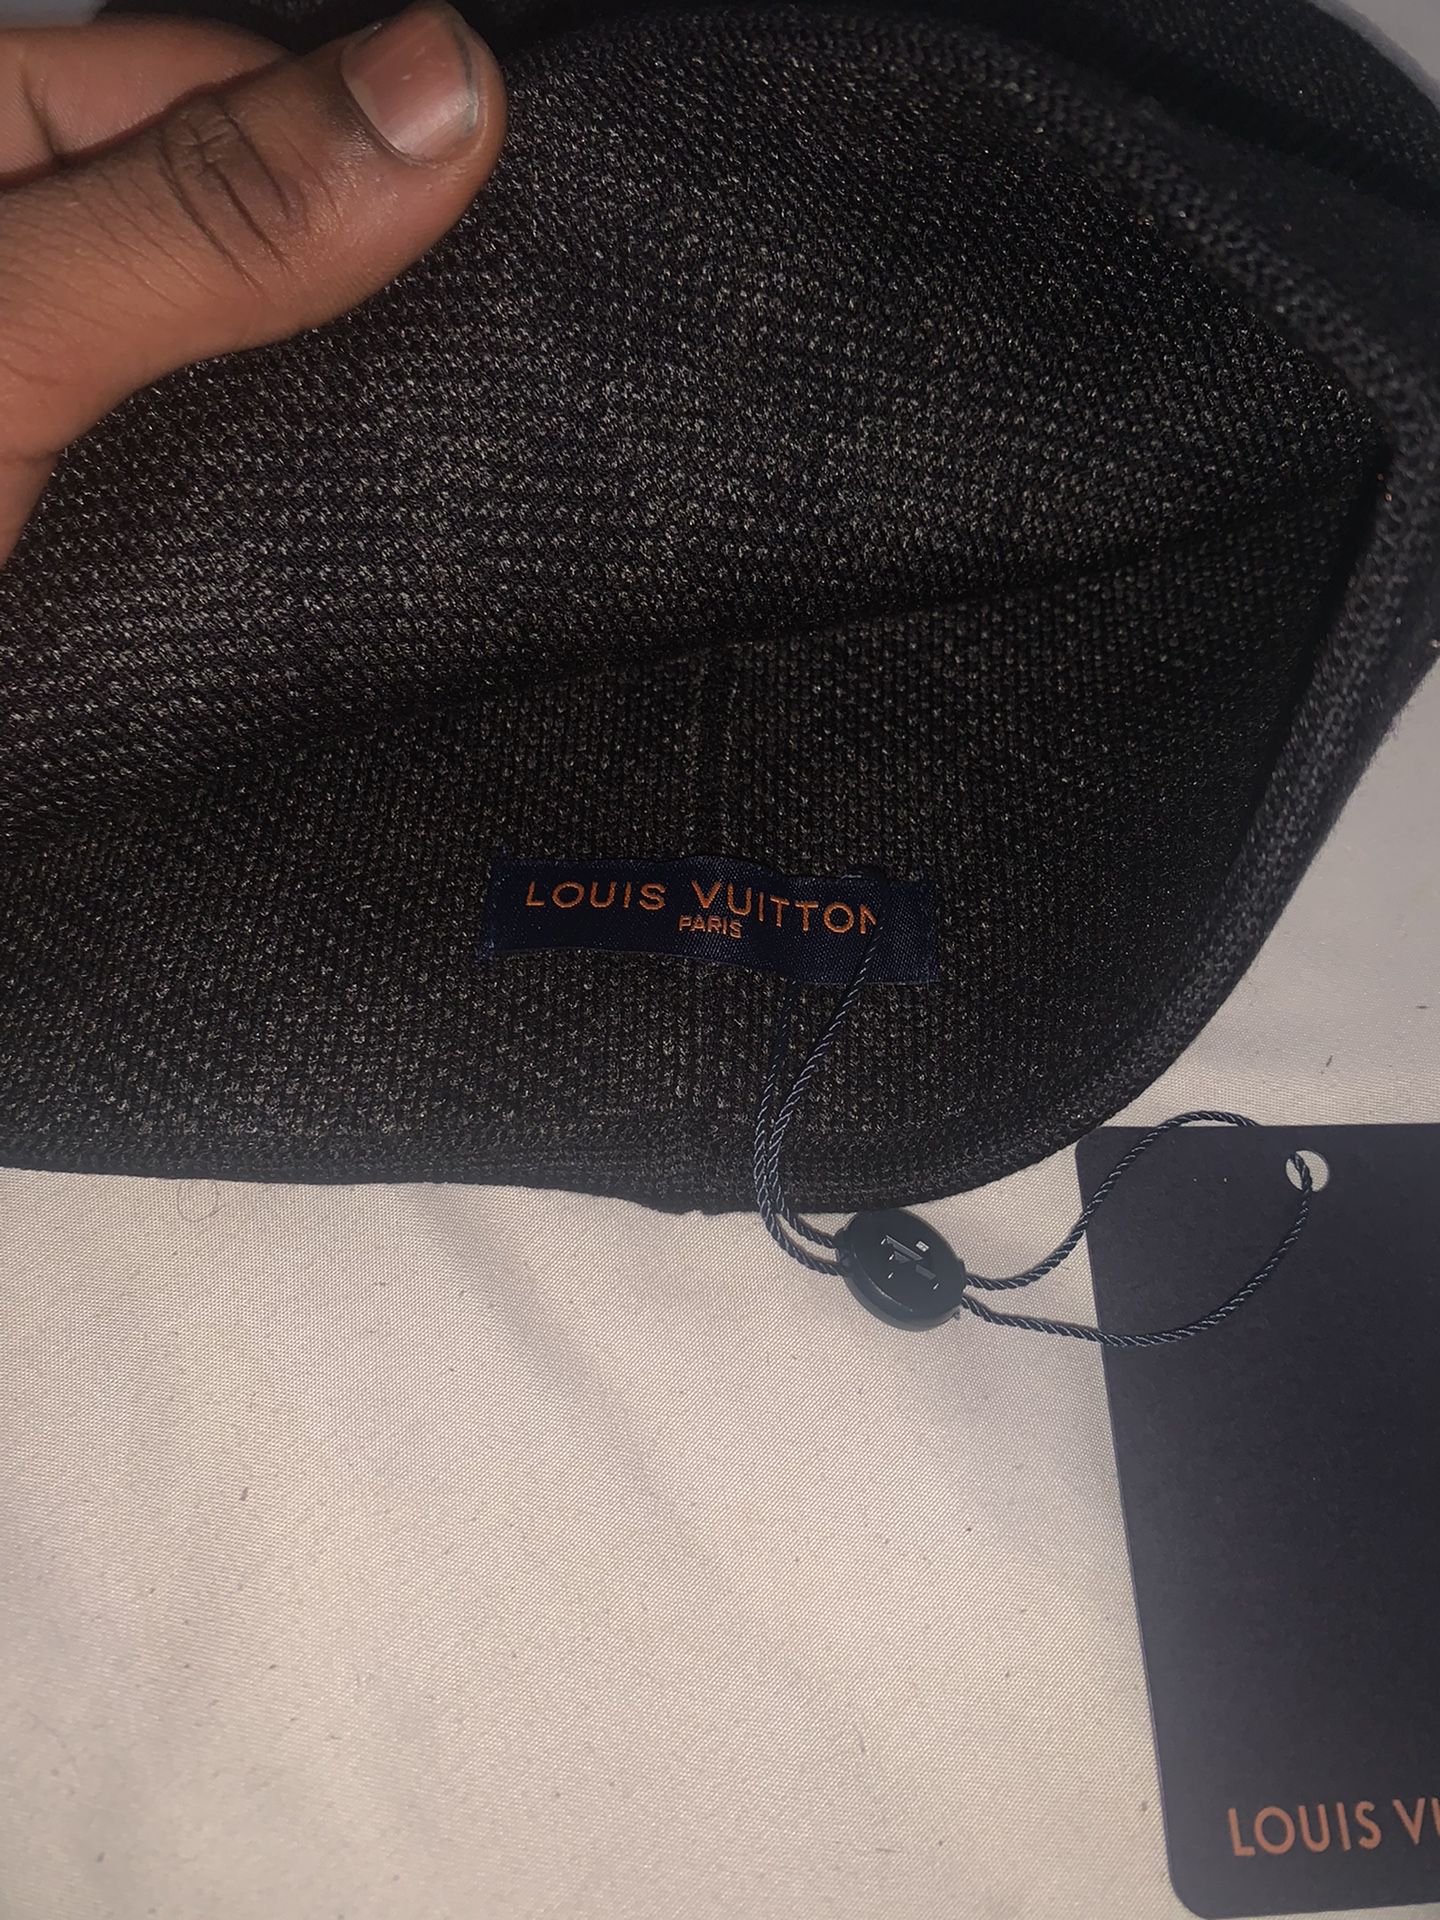 Black Lv Beanie for Sale in St. Louis, MO - OfferUp